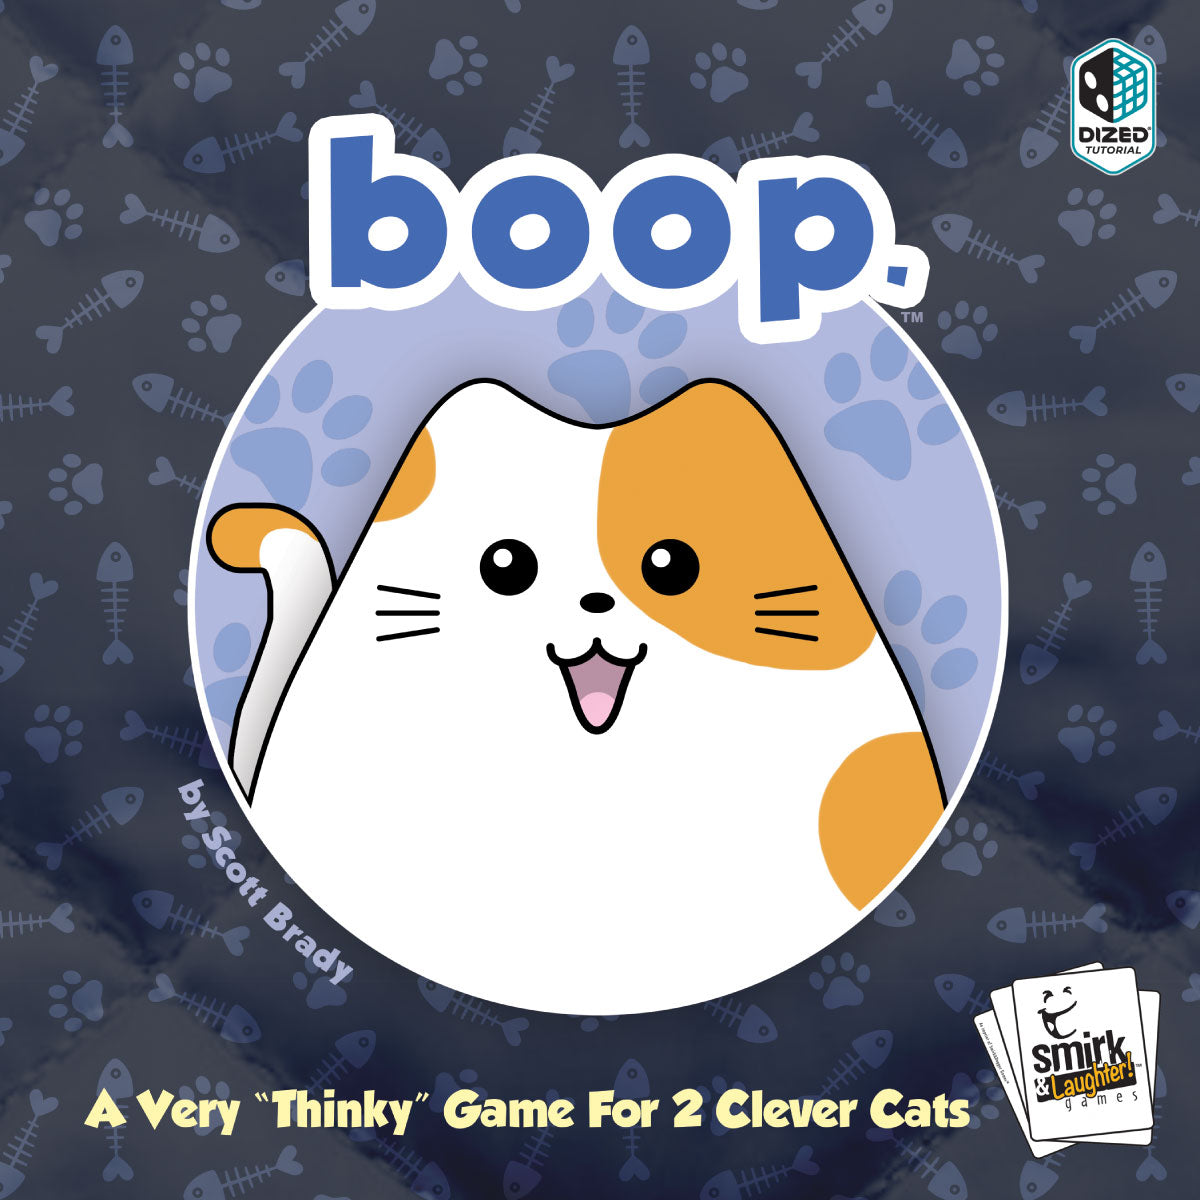 1000+ Ridiculously Cute Stickers - Board Game Barrister